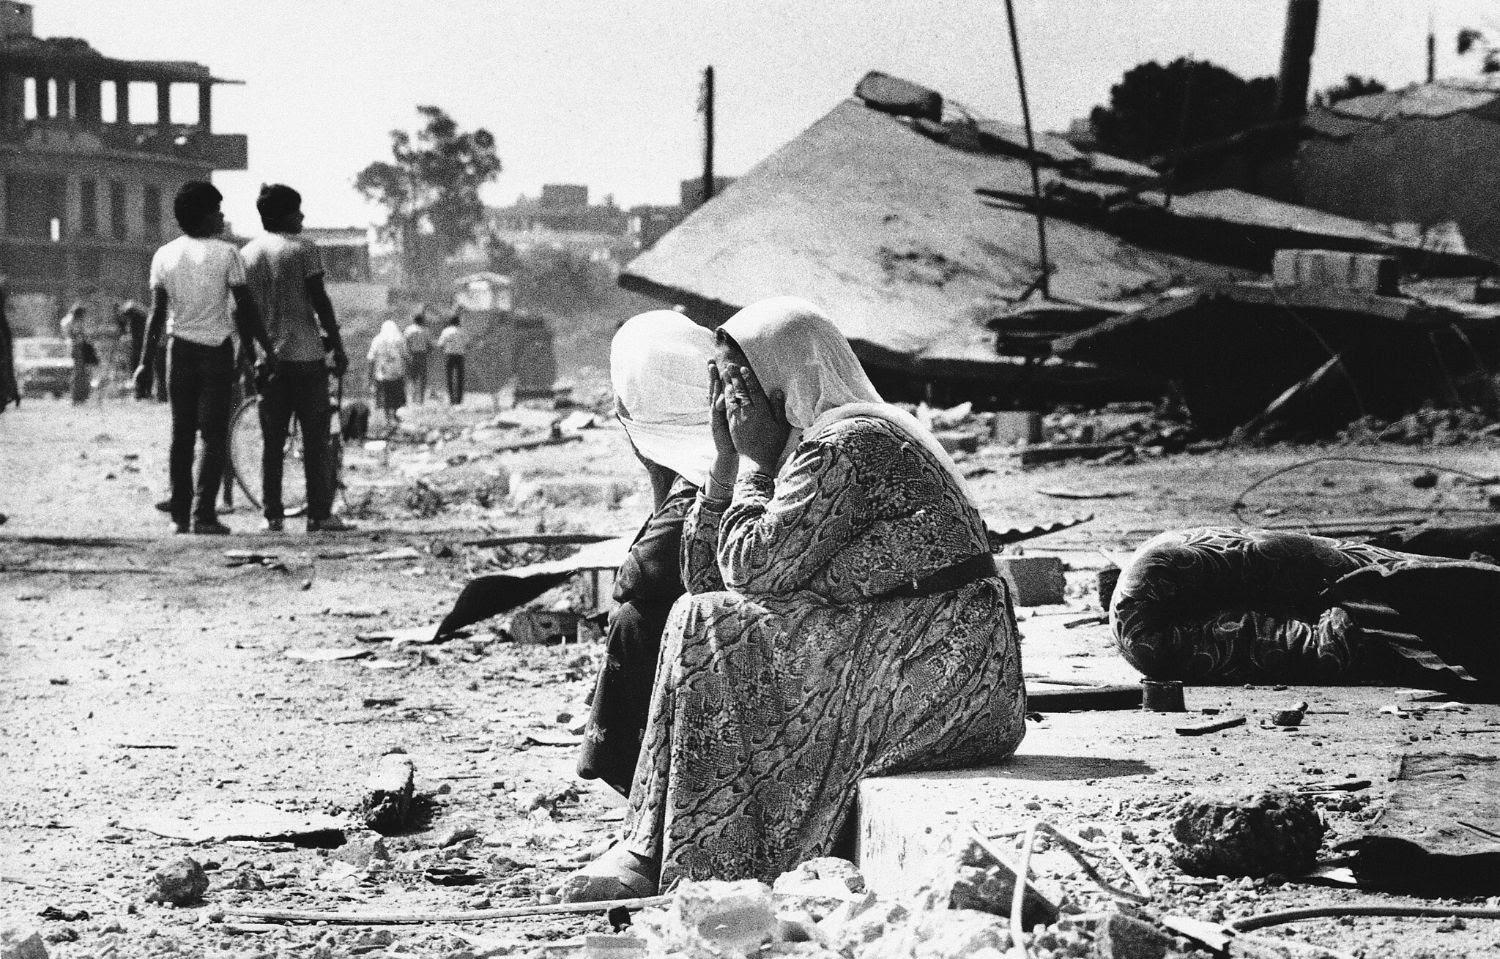 40 Years of Trauma: ADC Remembers the Victims of the Sabra and Shatila Massacre